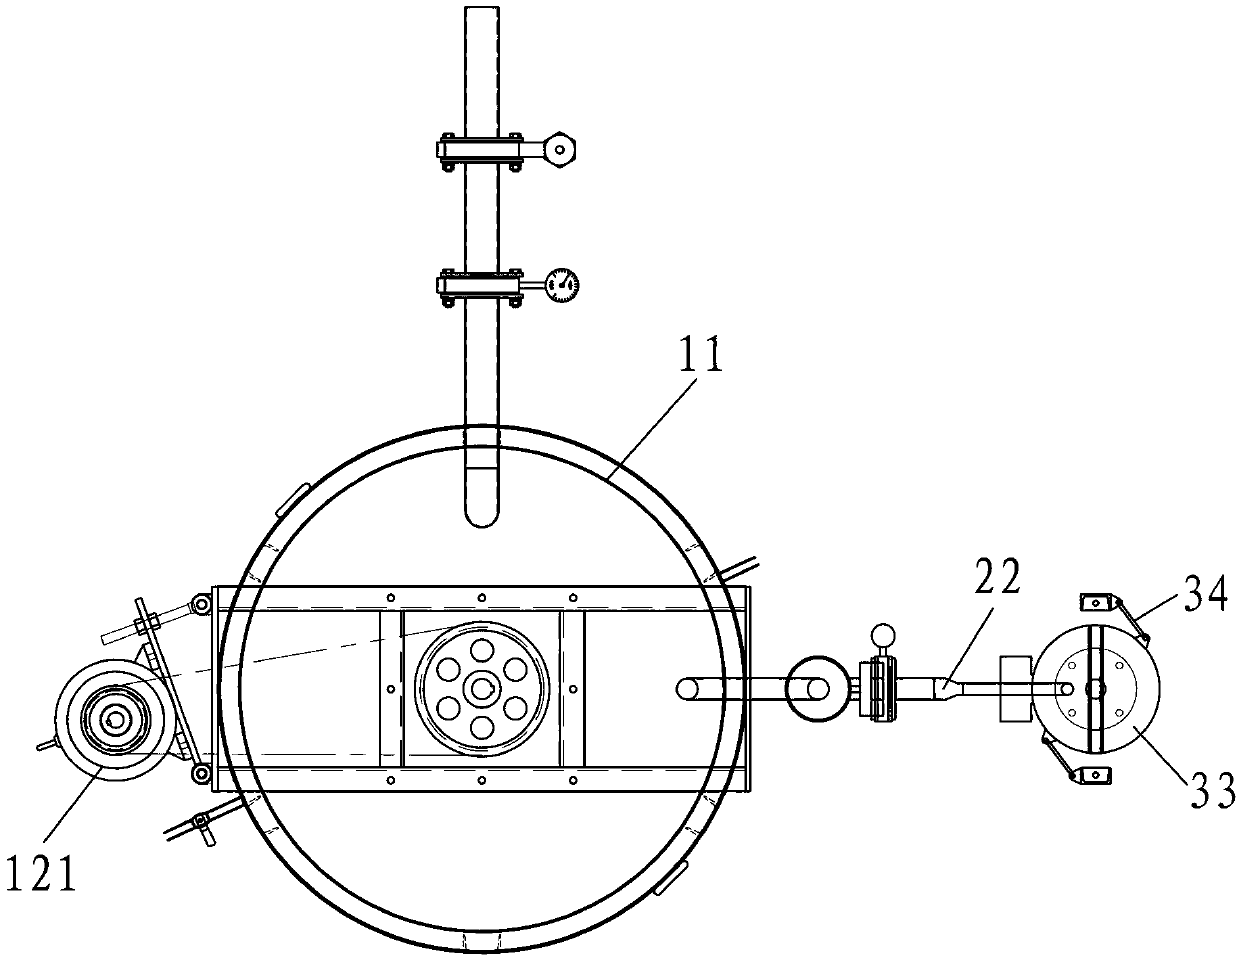 Aluminum powder mixing and metering device